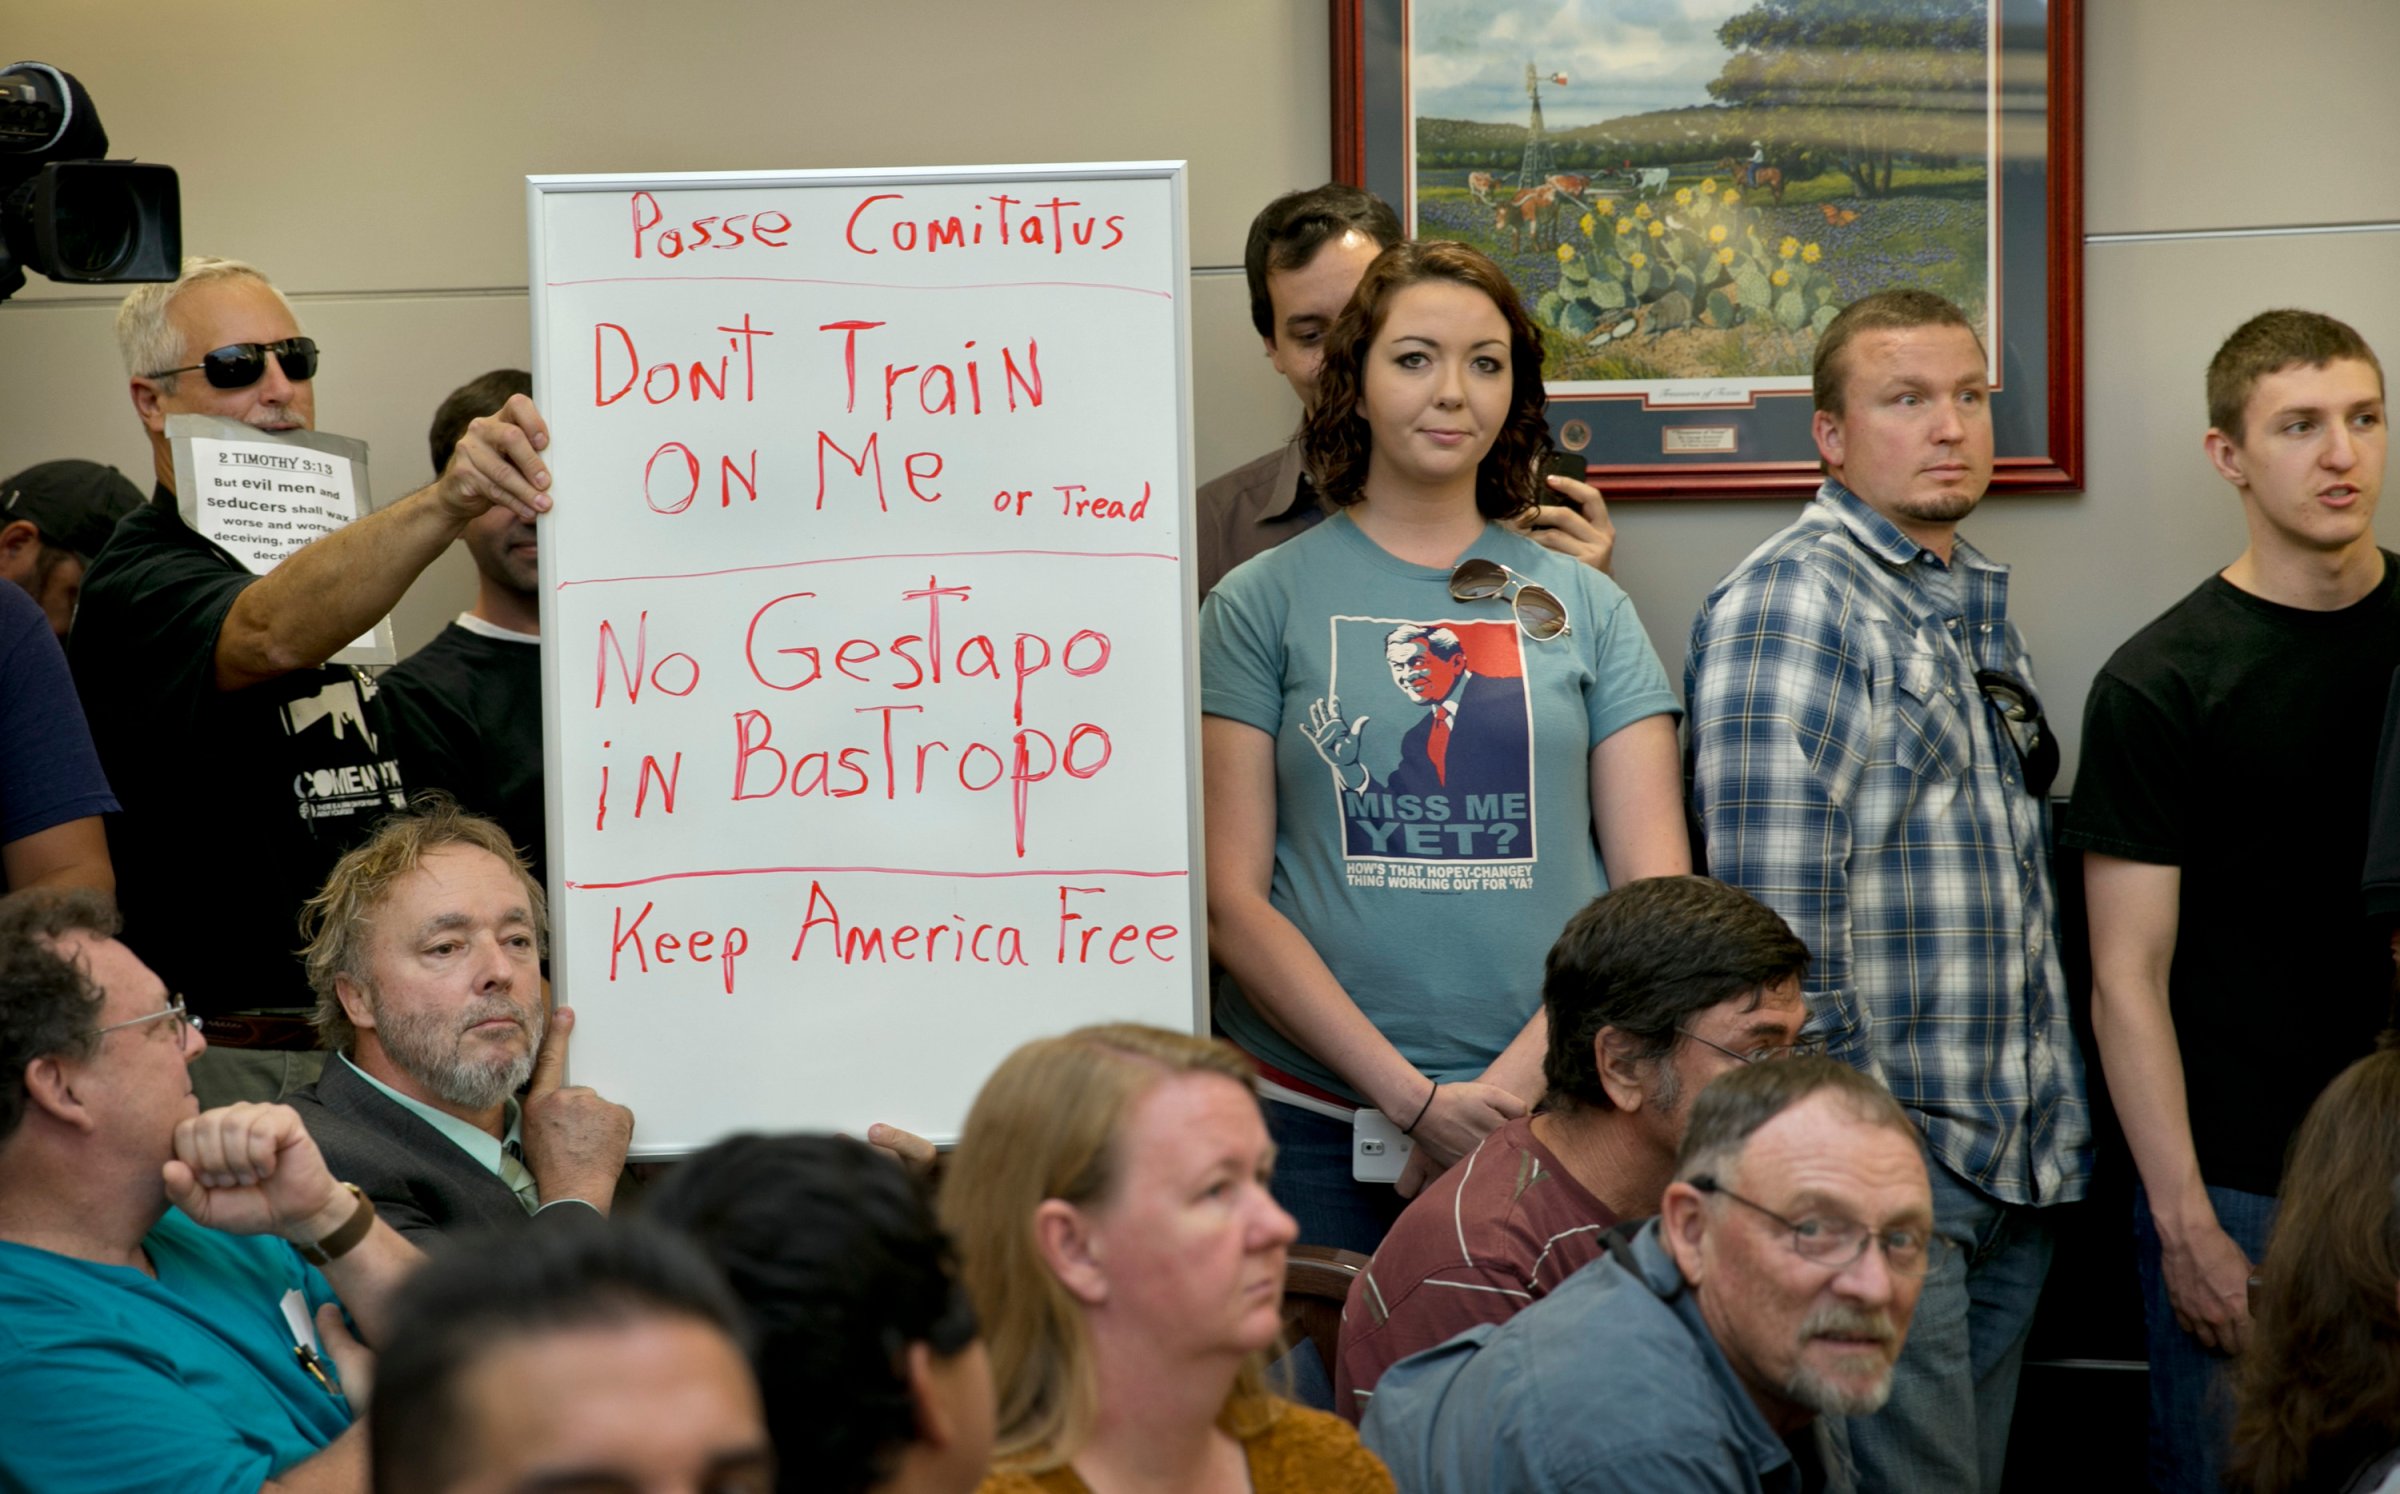 Bob Welch, standing at left, and Jim Dillon, hold a sign at a public hearing about the Jade Helm 15 military training exercise in Bastrop, Texas, April 27, 2015